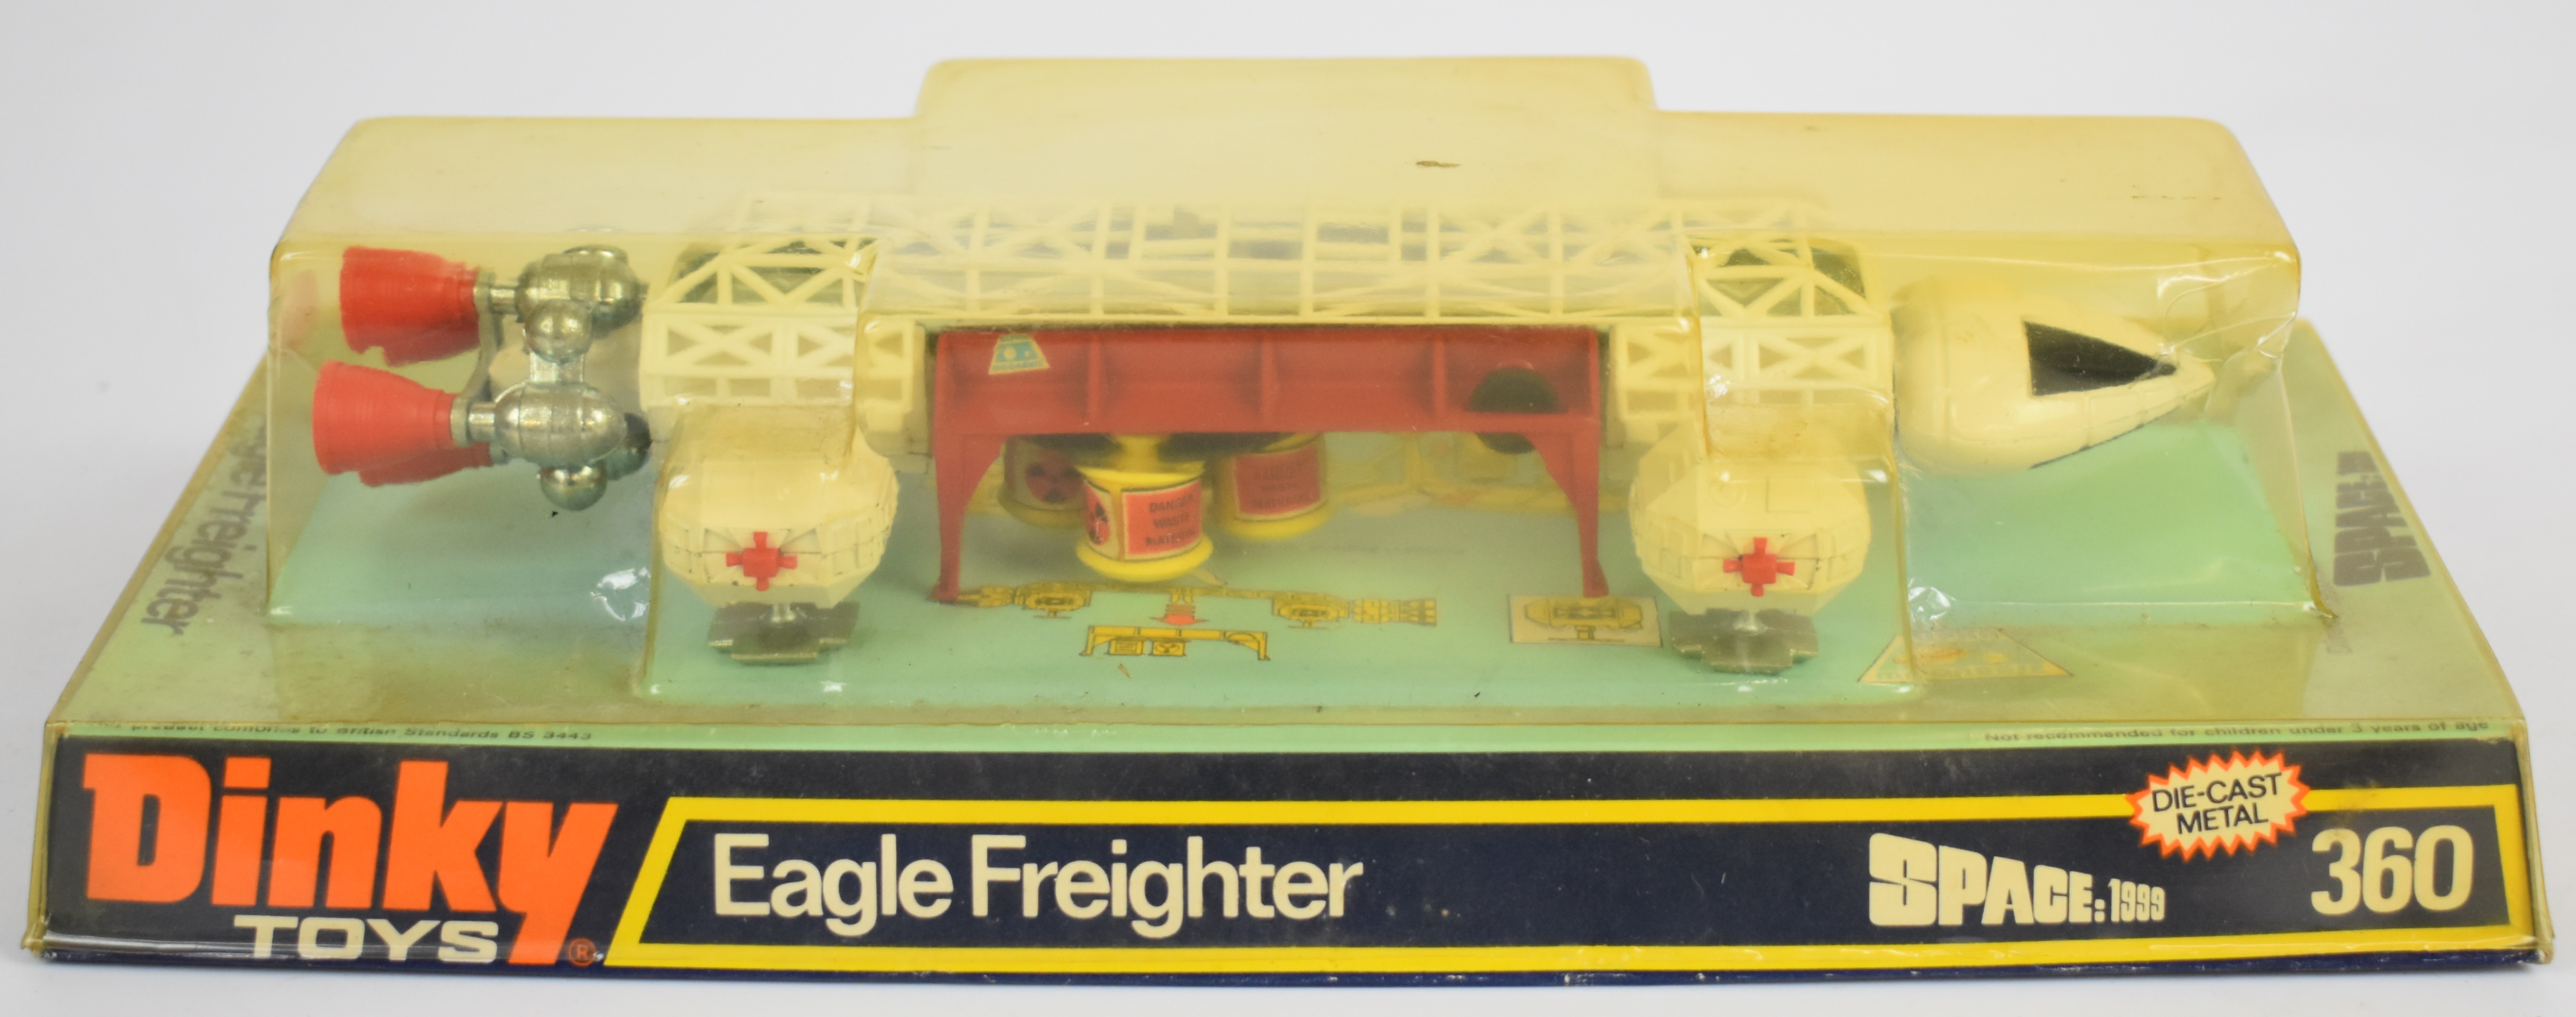 Dinky Toys Space:1999 diecast model Eagle Freighter, 360, in original bubble display box.